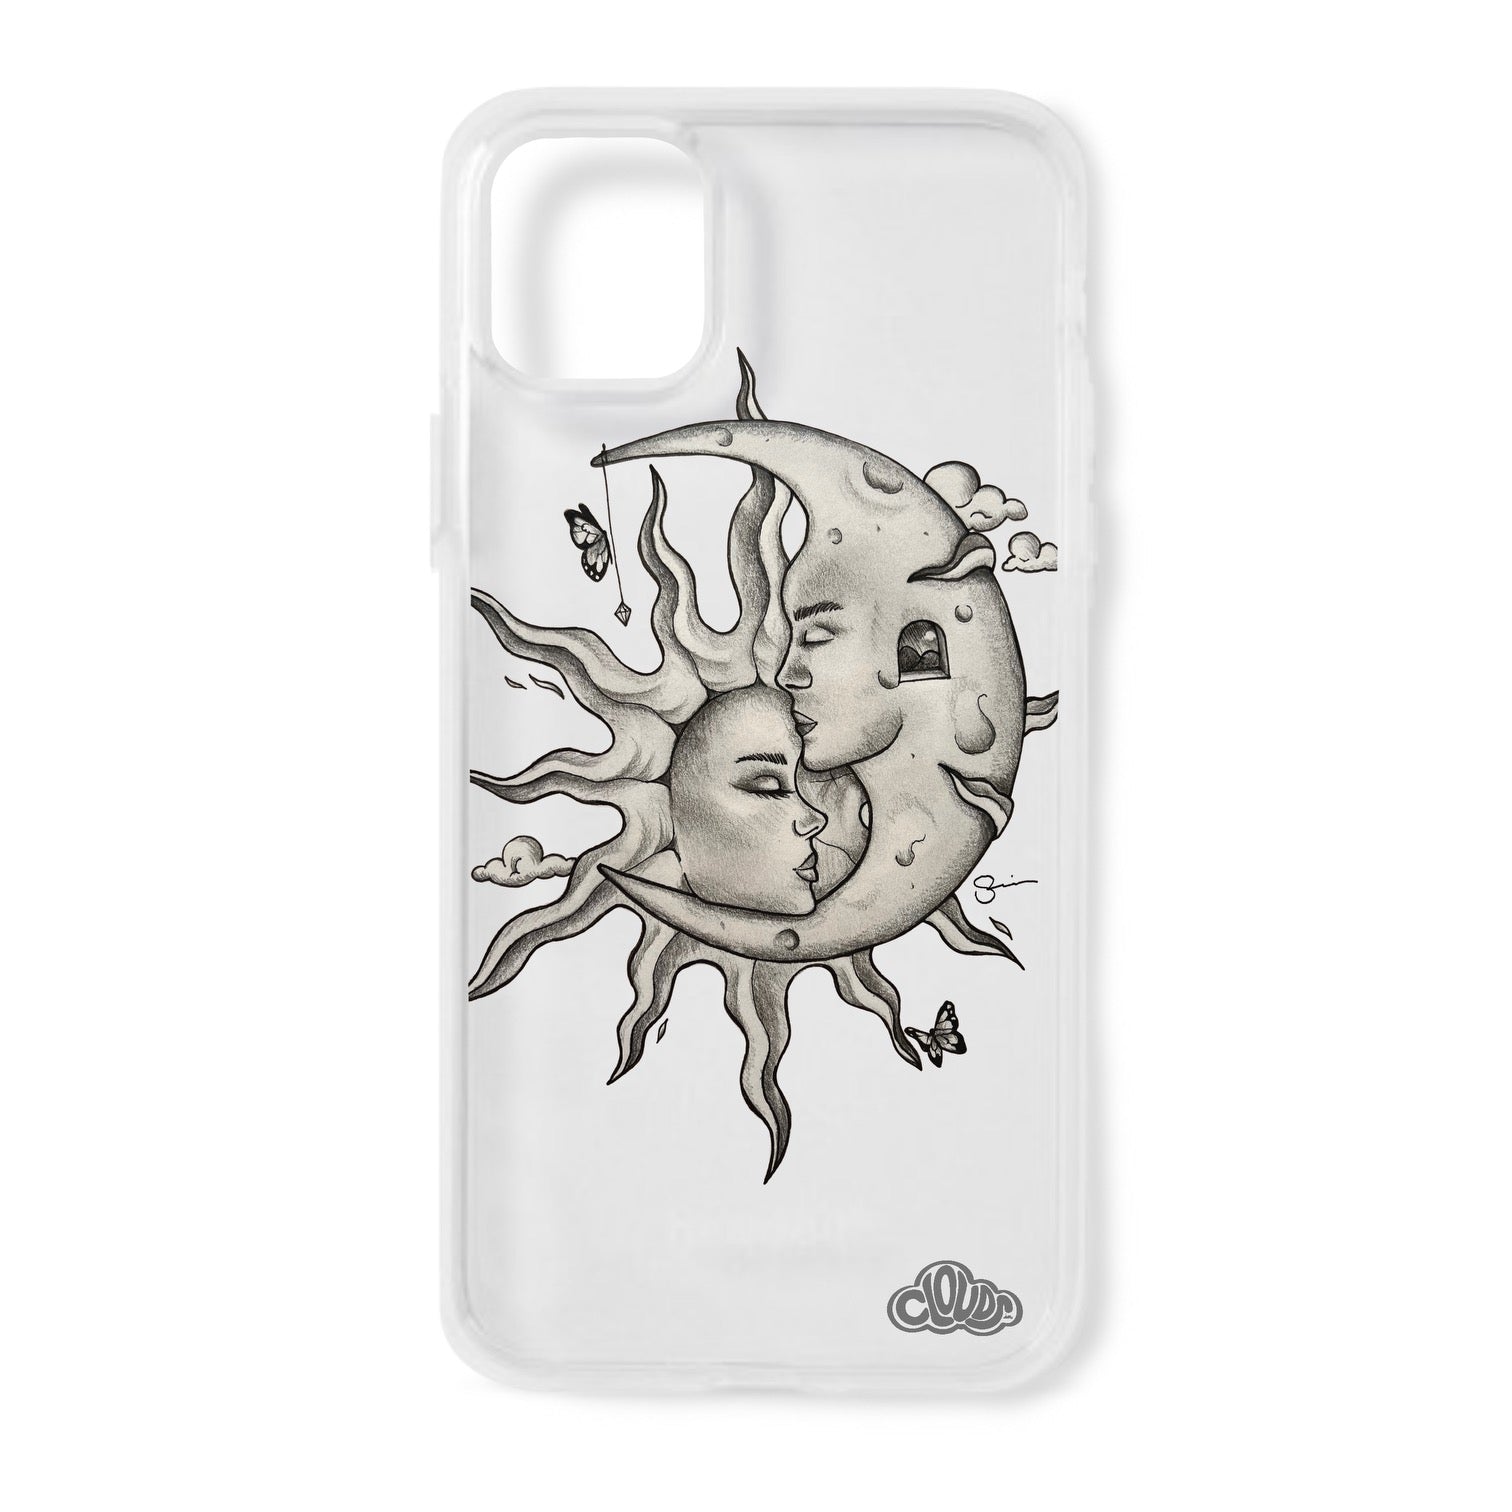 We Melt Into Each Other iPhone Case